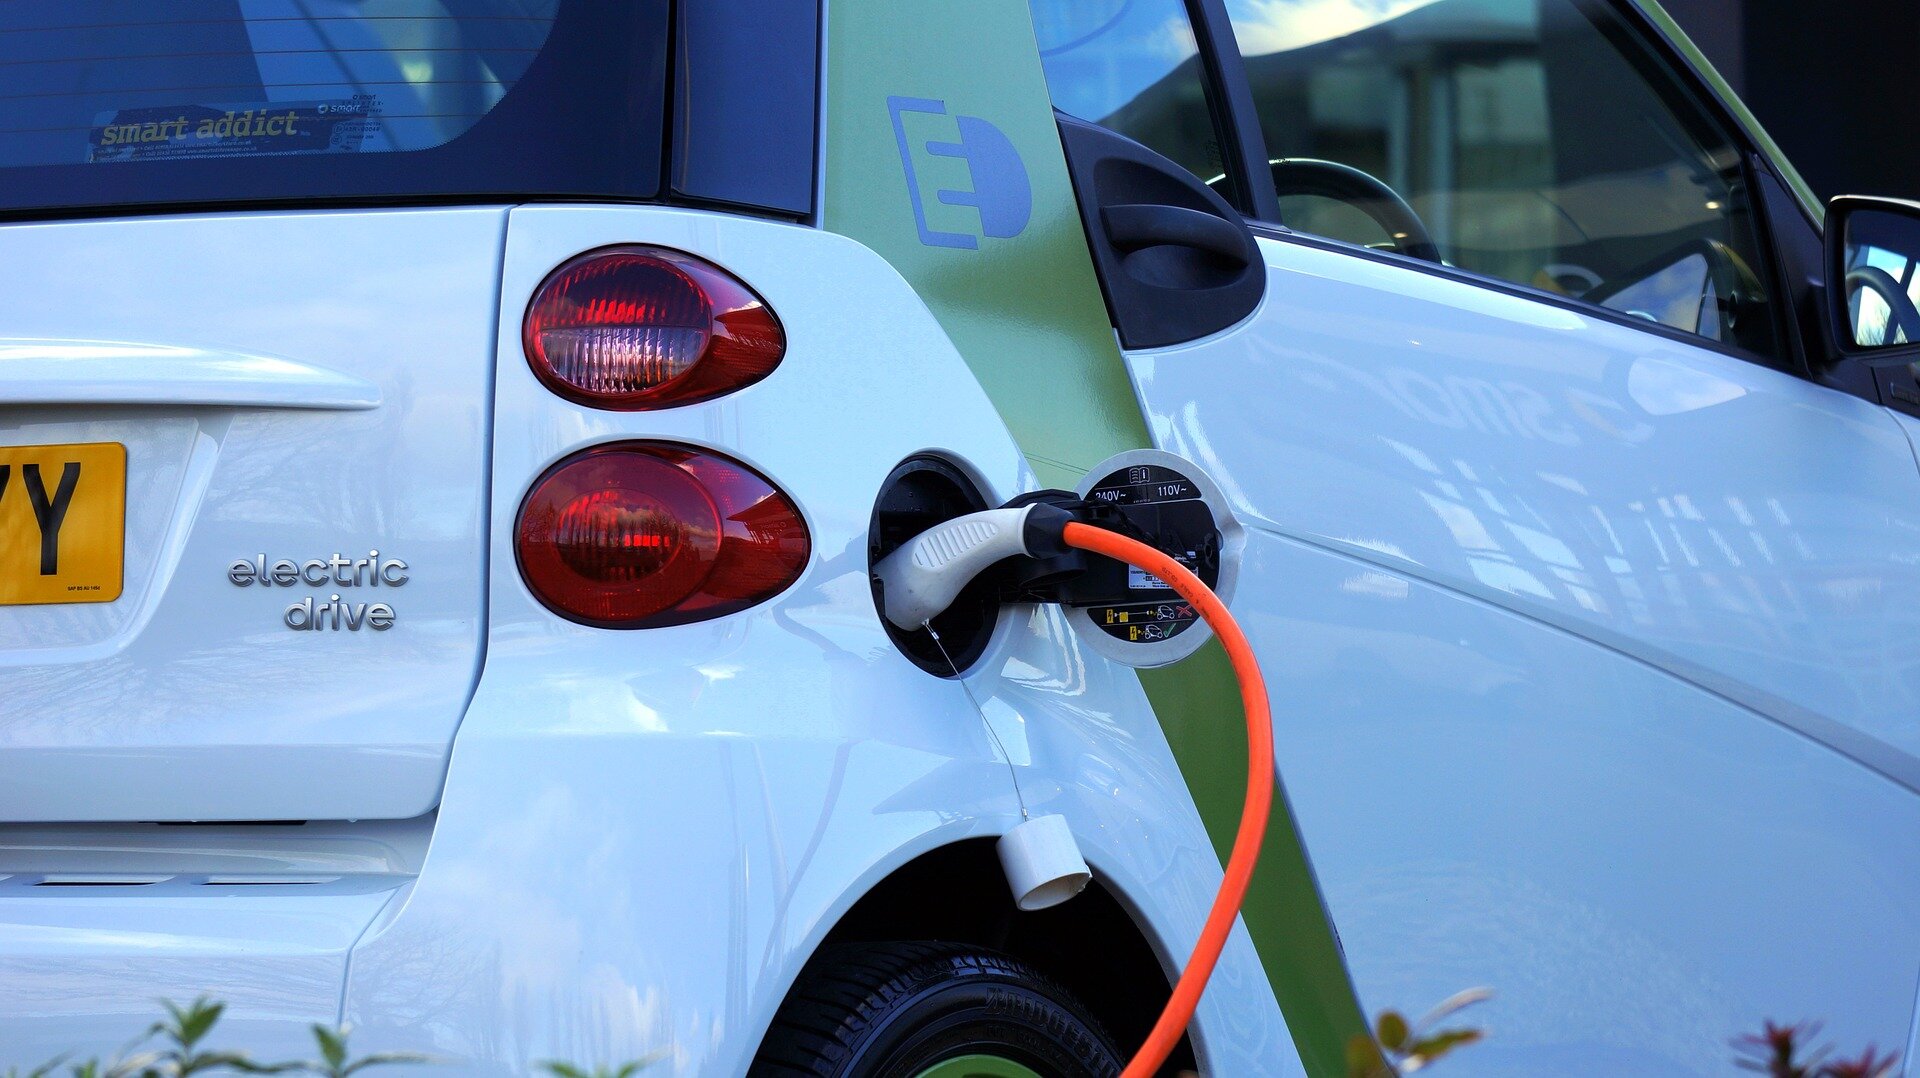 Advances in technology are driving popularity of electric vehicles, finds new research